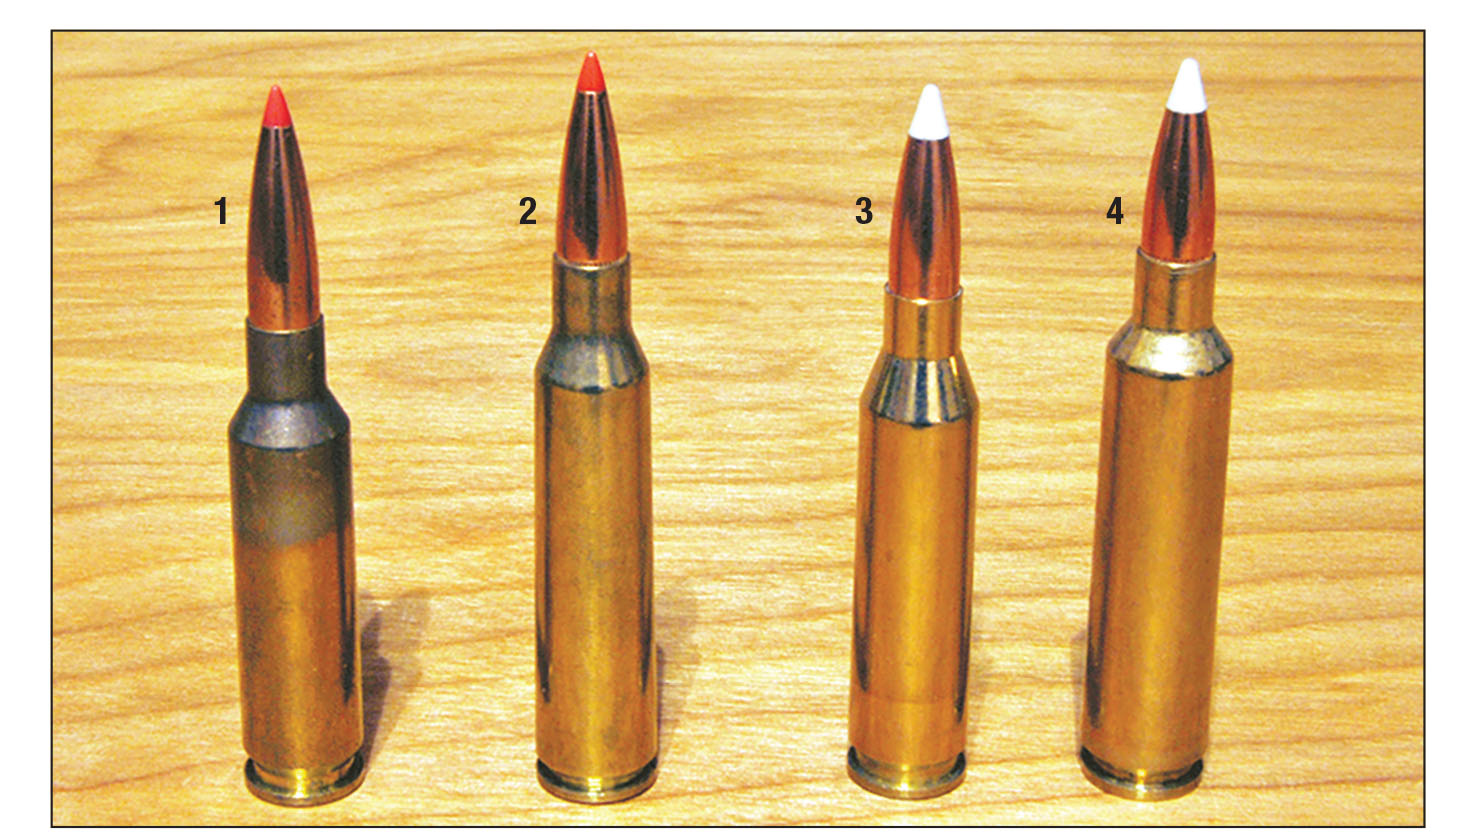 These similar cartridges include the (1) 6.5 Creedmoor, (2) 6.5x55 Mauser, (3) .260 Remington and the (4) 6.5-284 Norma.